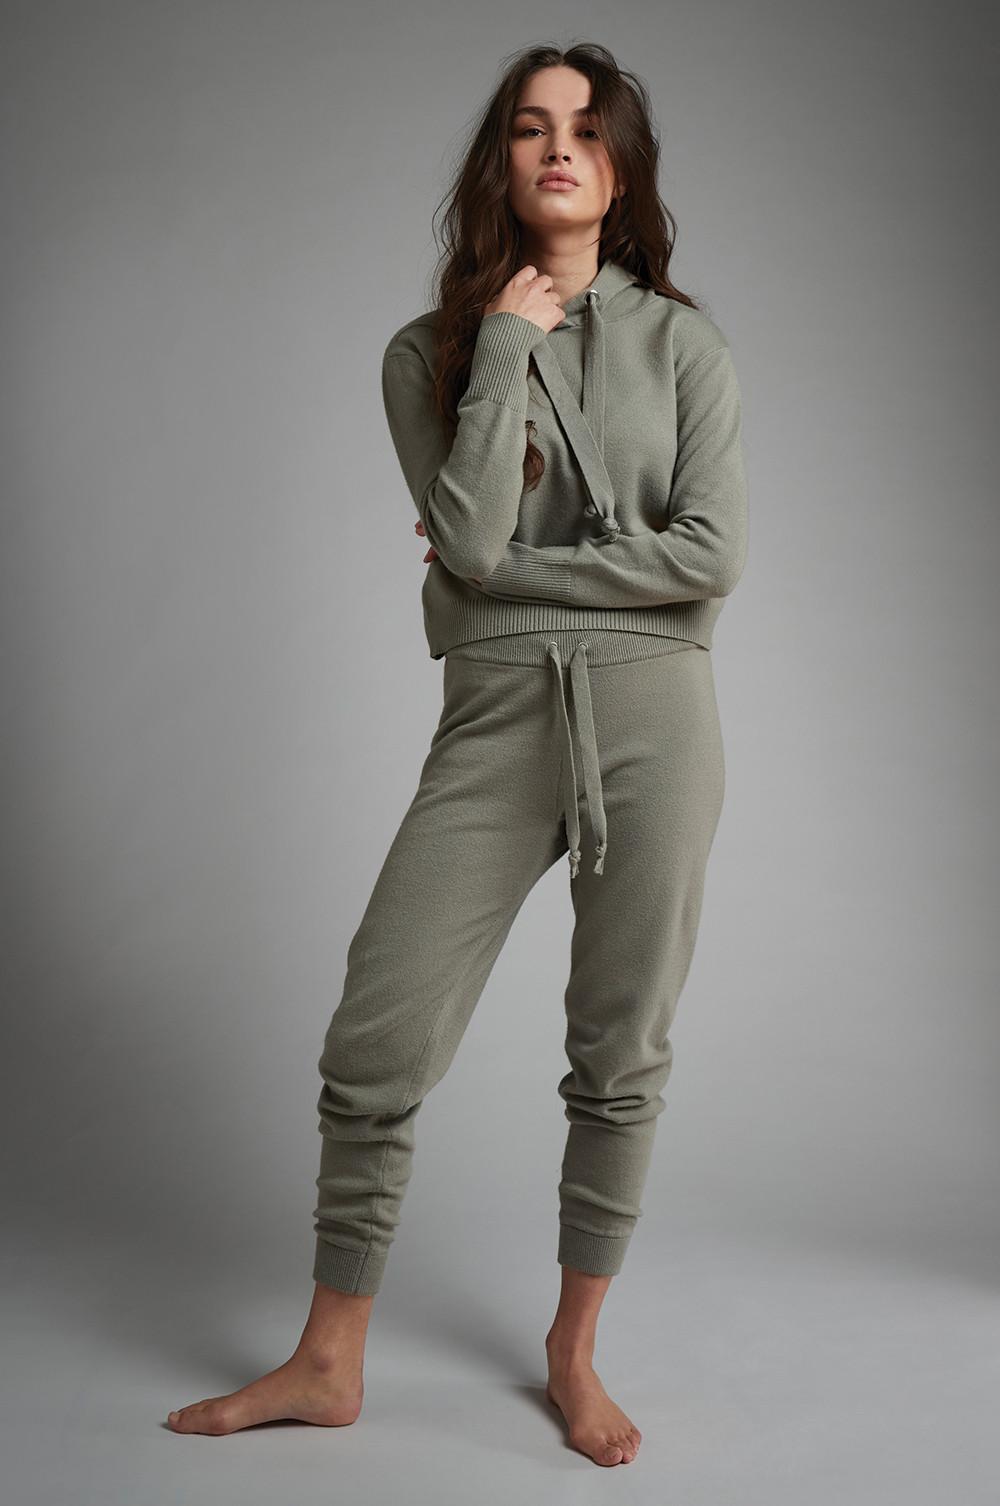 tracksuit bottoms outfit